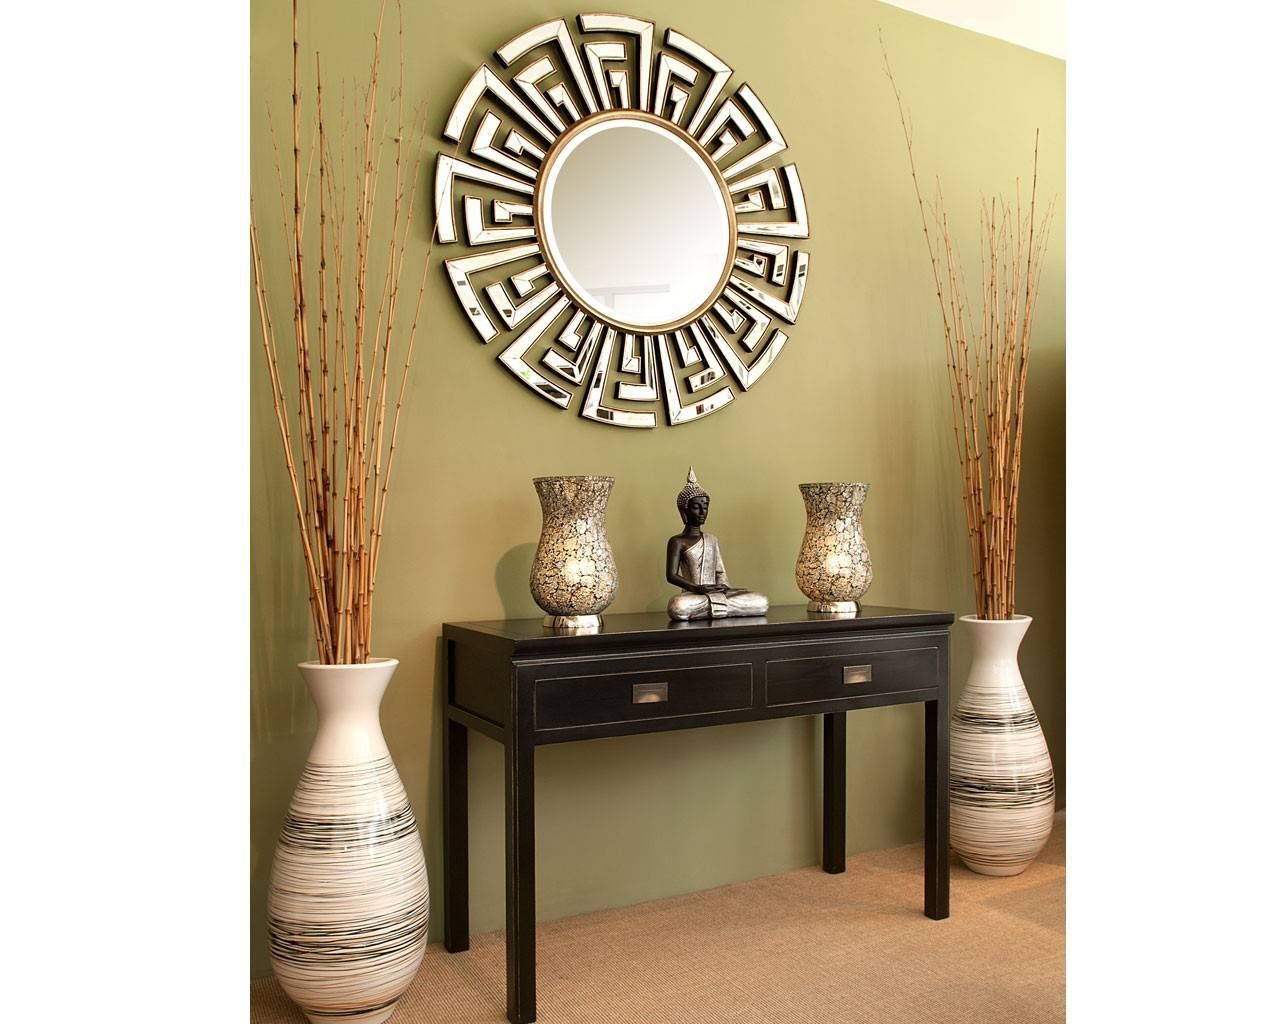 Contemporary Art Deco Round Mirror | Statement Circular Mirrors With Regard To Deco Mirrors (View 3 of 15)